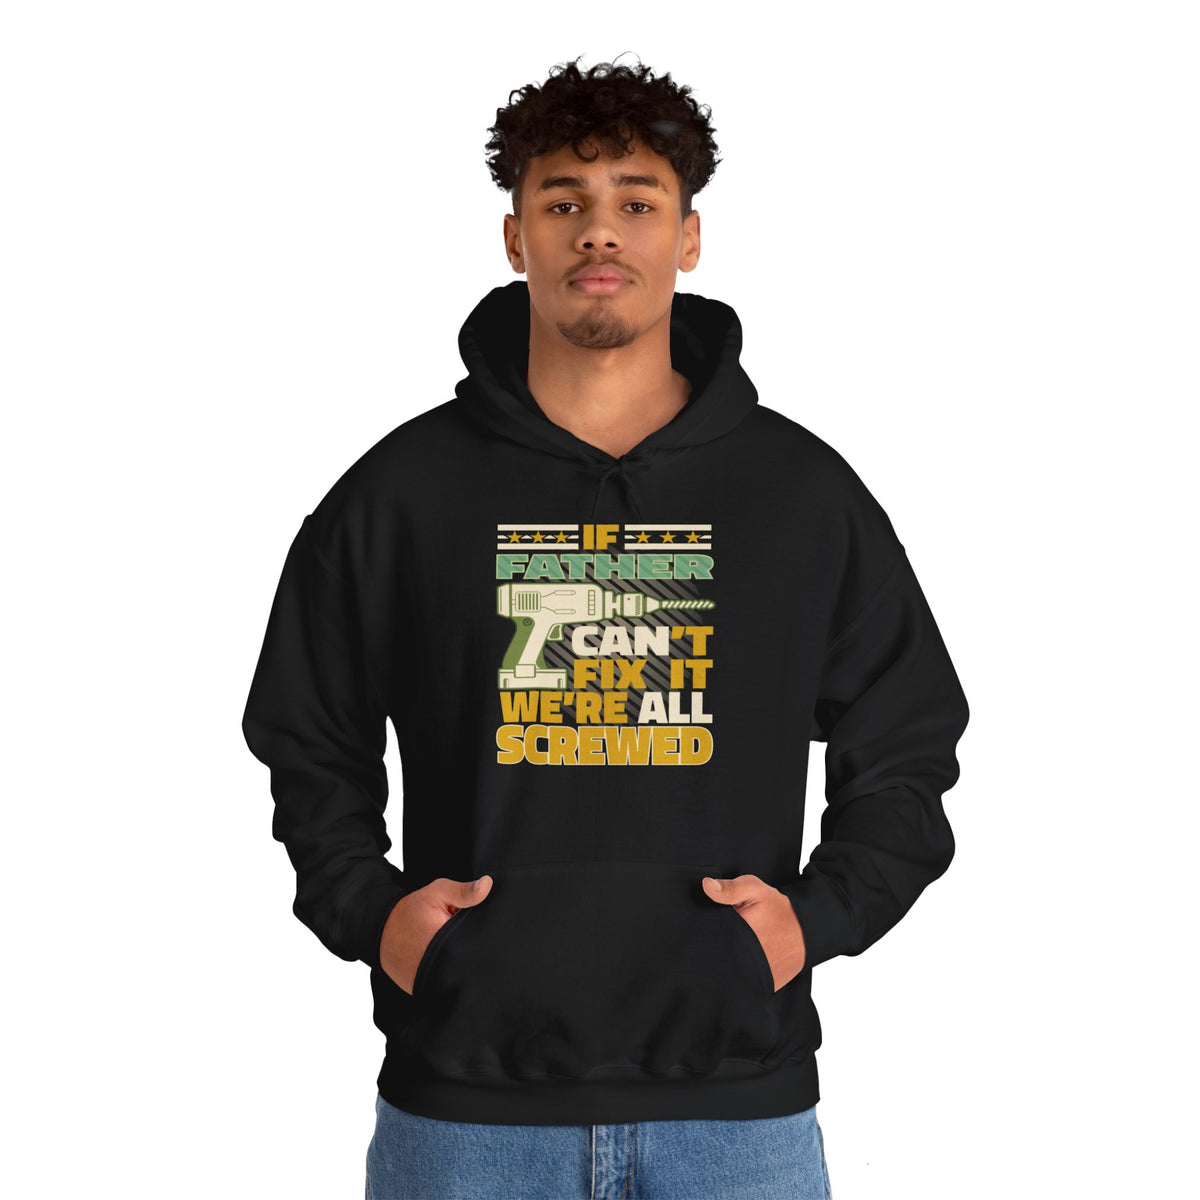 If Father Can't Fix It We Re All Screwed Hoodie